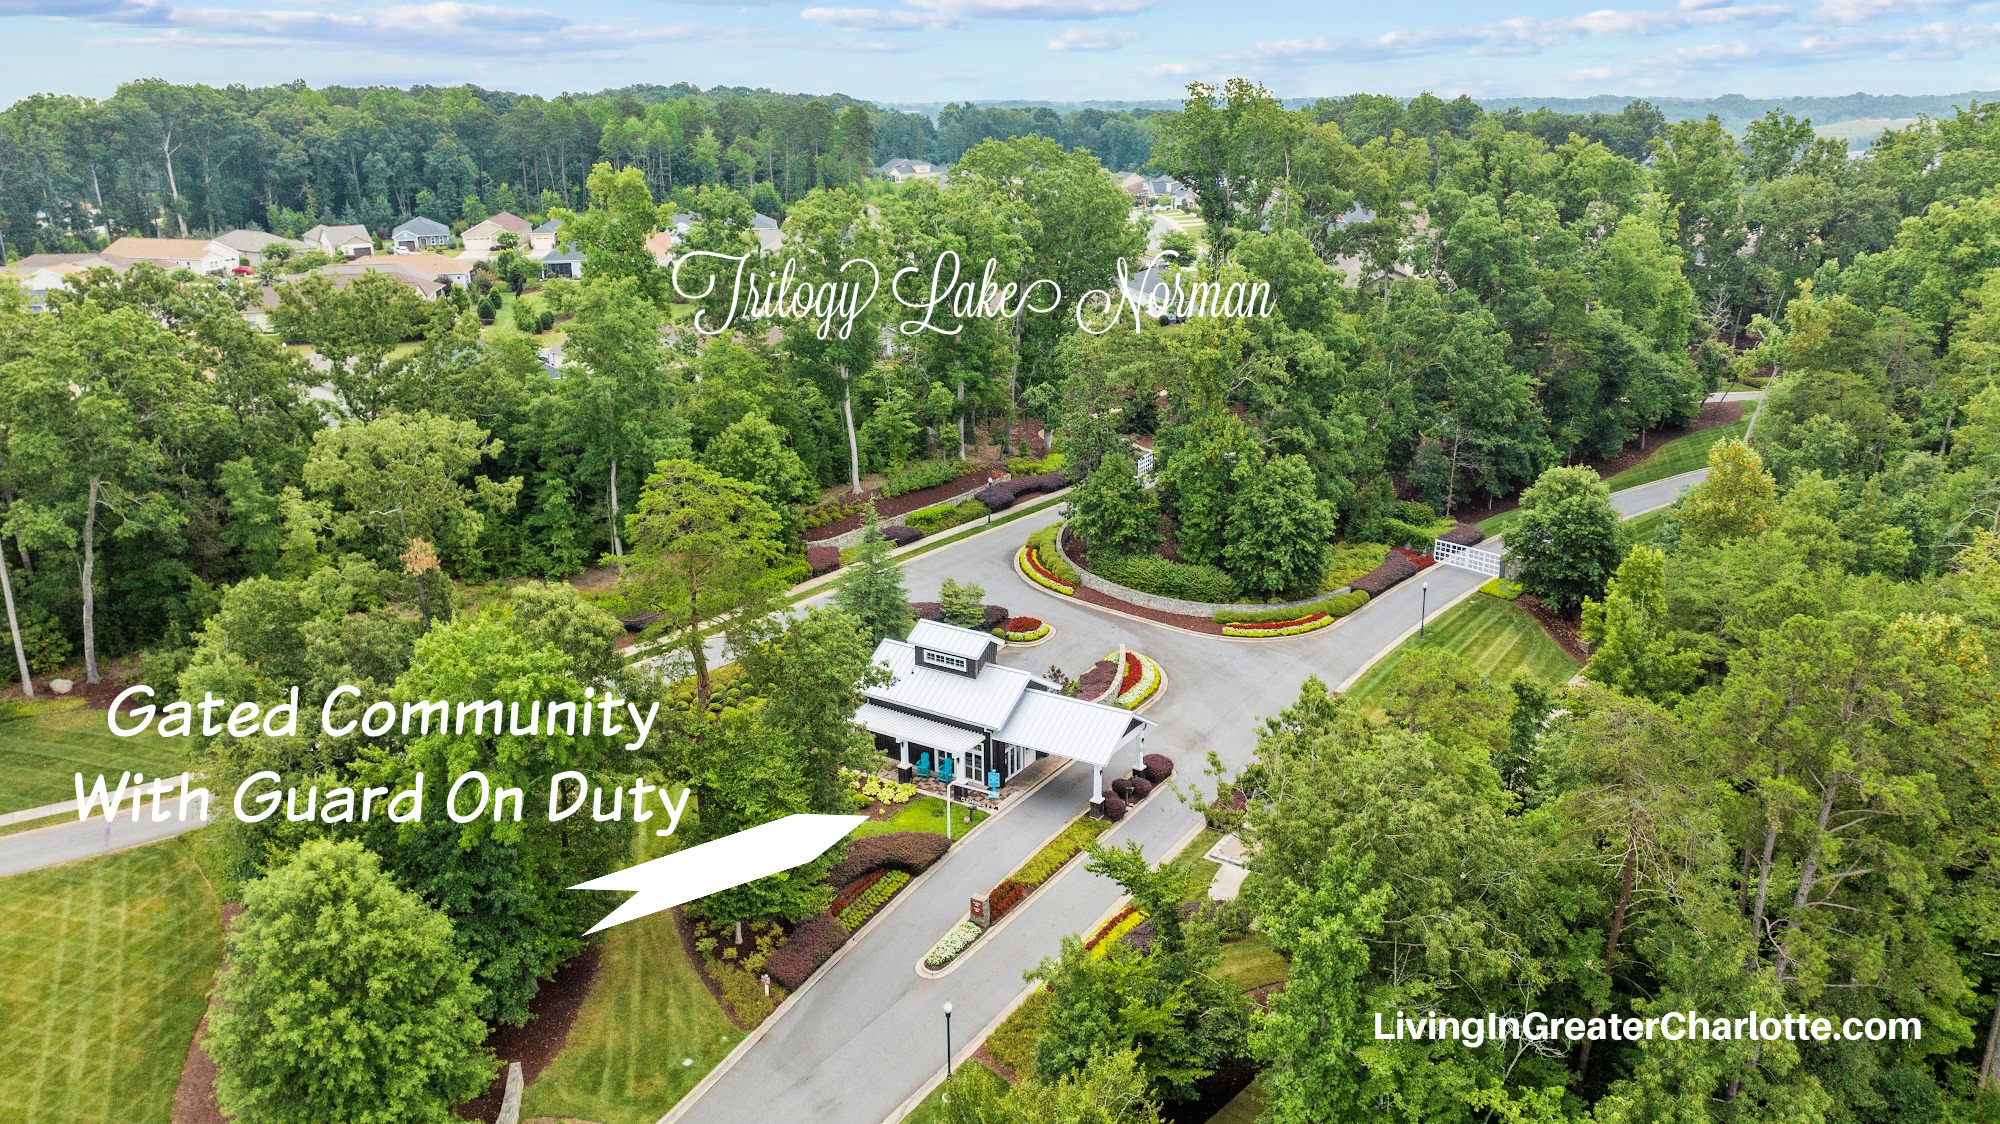 Trilogy Lake Norman Gated Entrance - 55+ Community in Denver NC Amazing Amenities